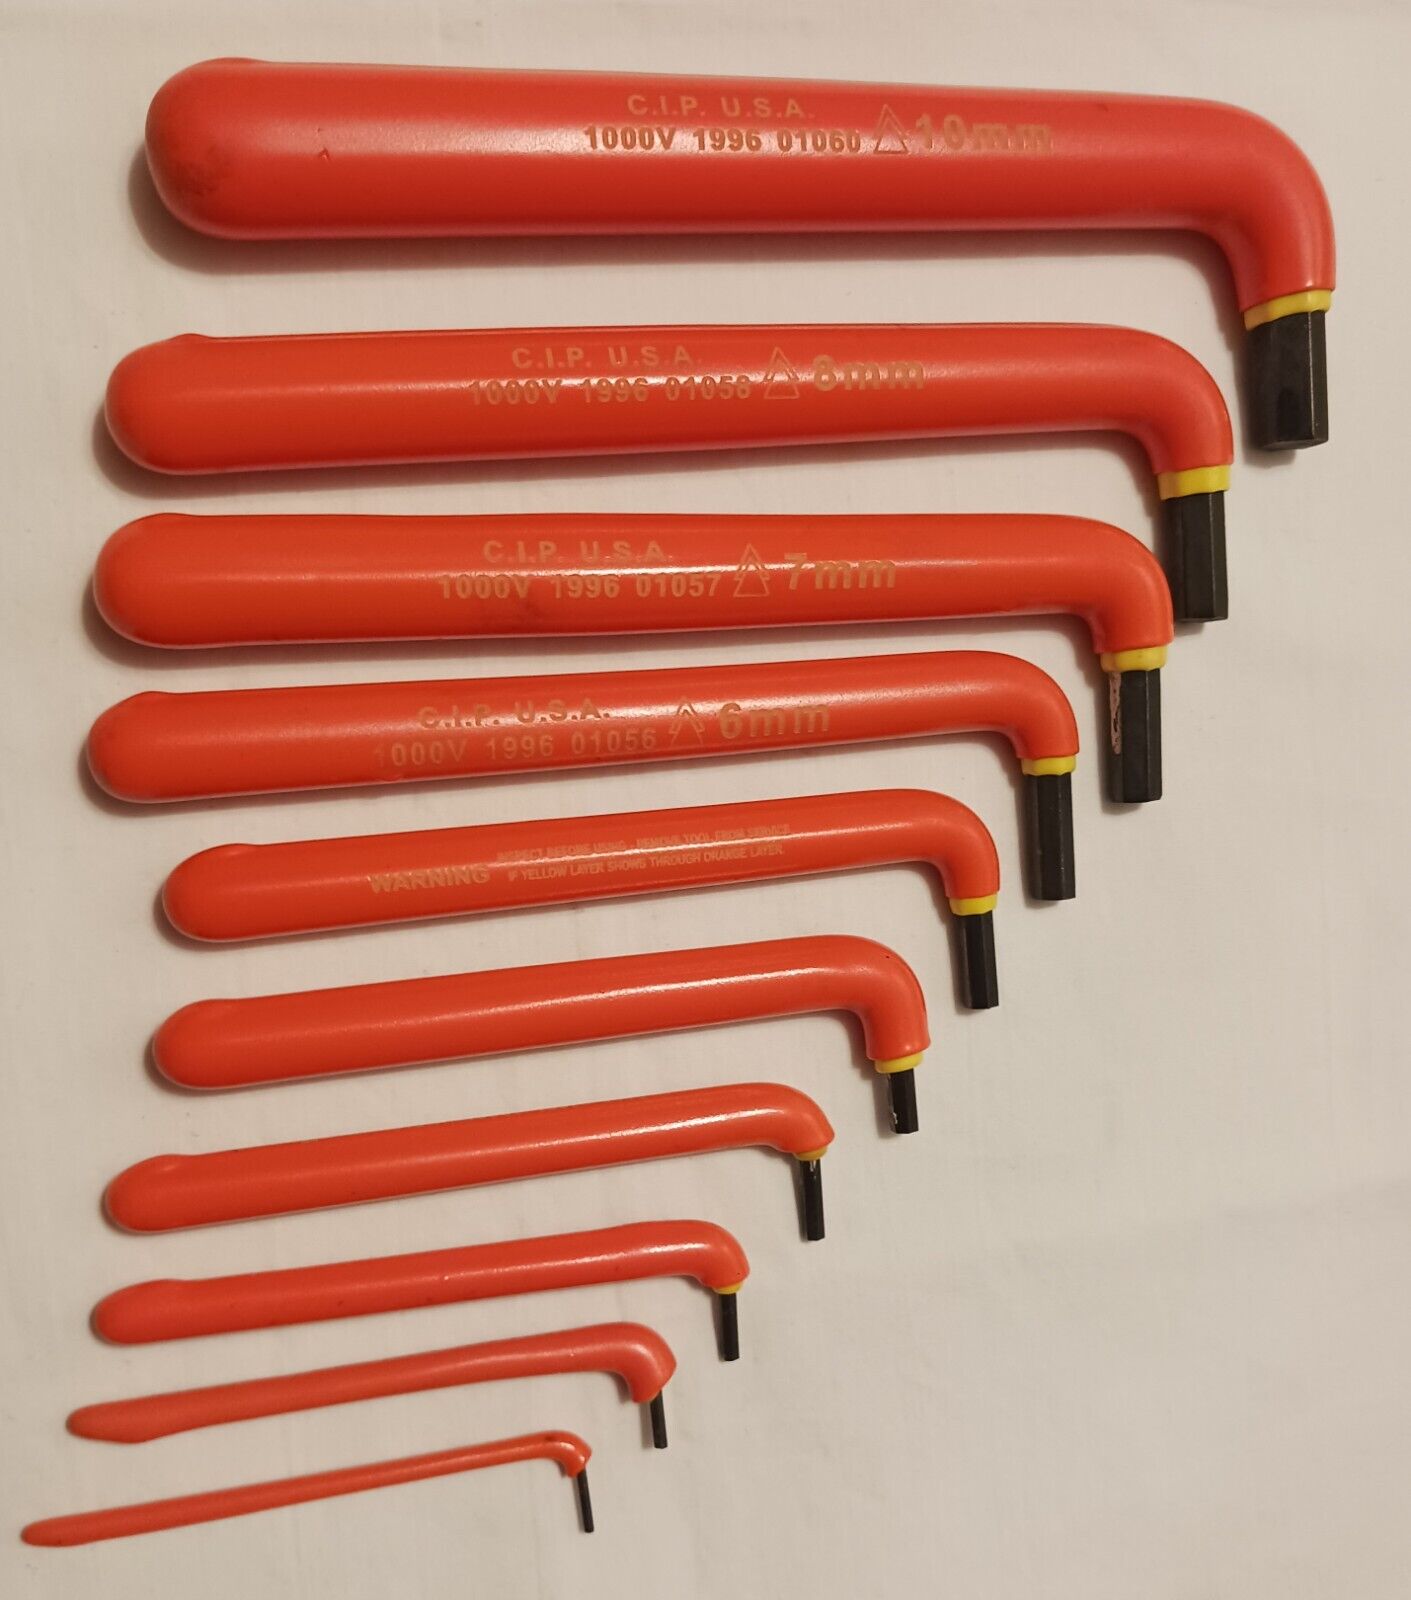 Insulated allen wrench set. (10 pc). High Voltage tools. Gently used. Ships Free